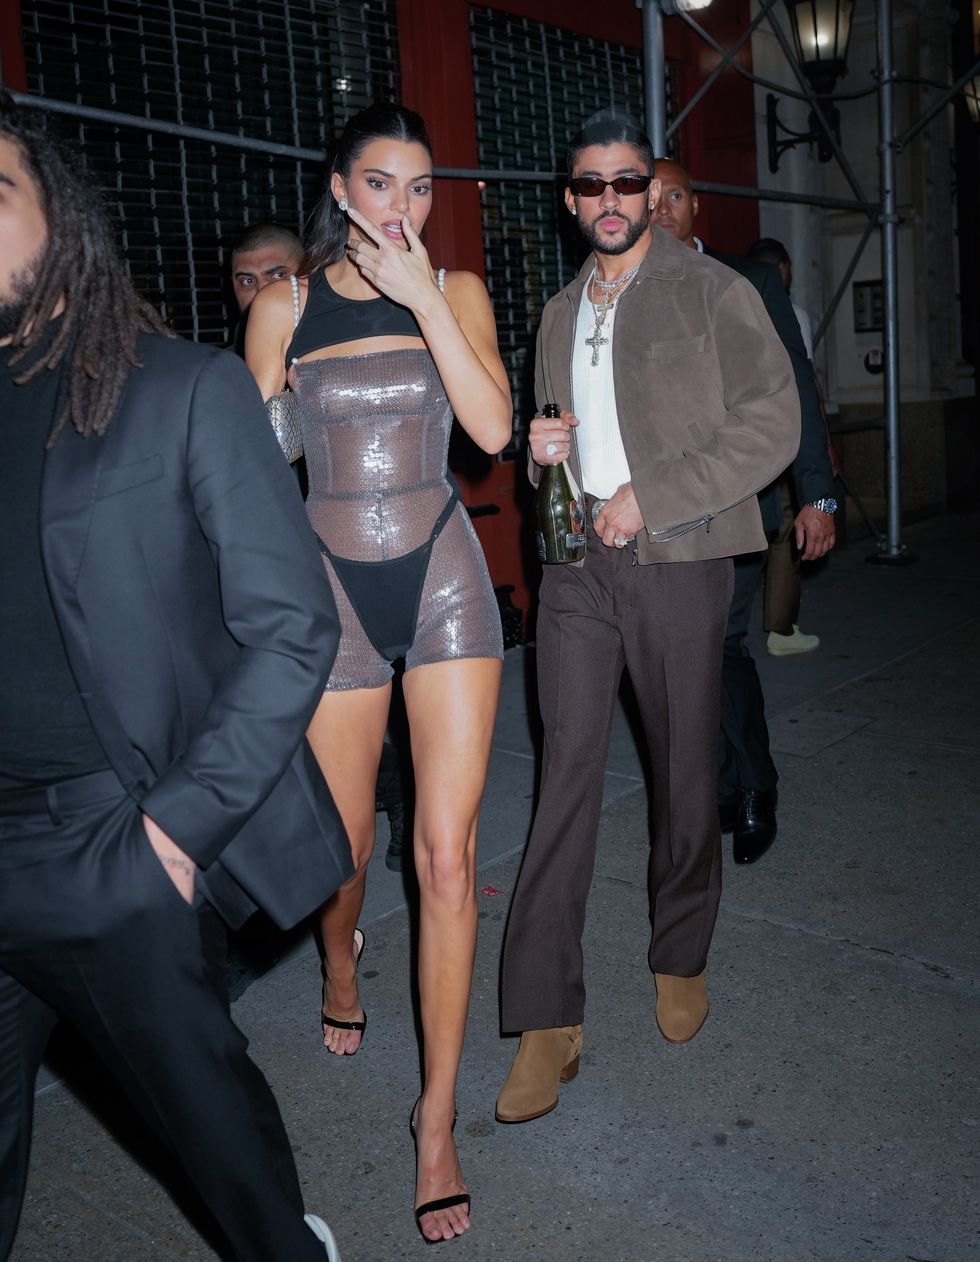 Kendall Jenner and Bad Bunny’s Full Relationship Timeline